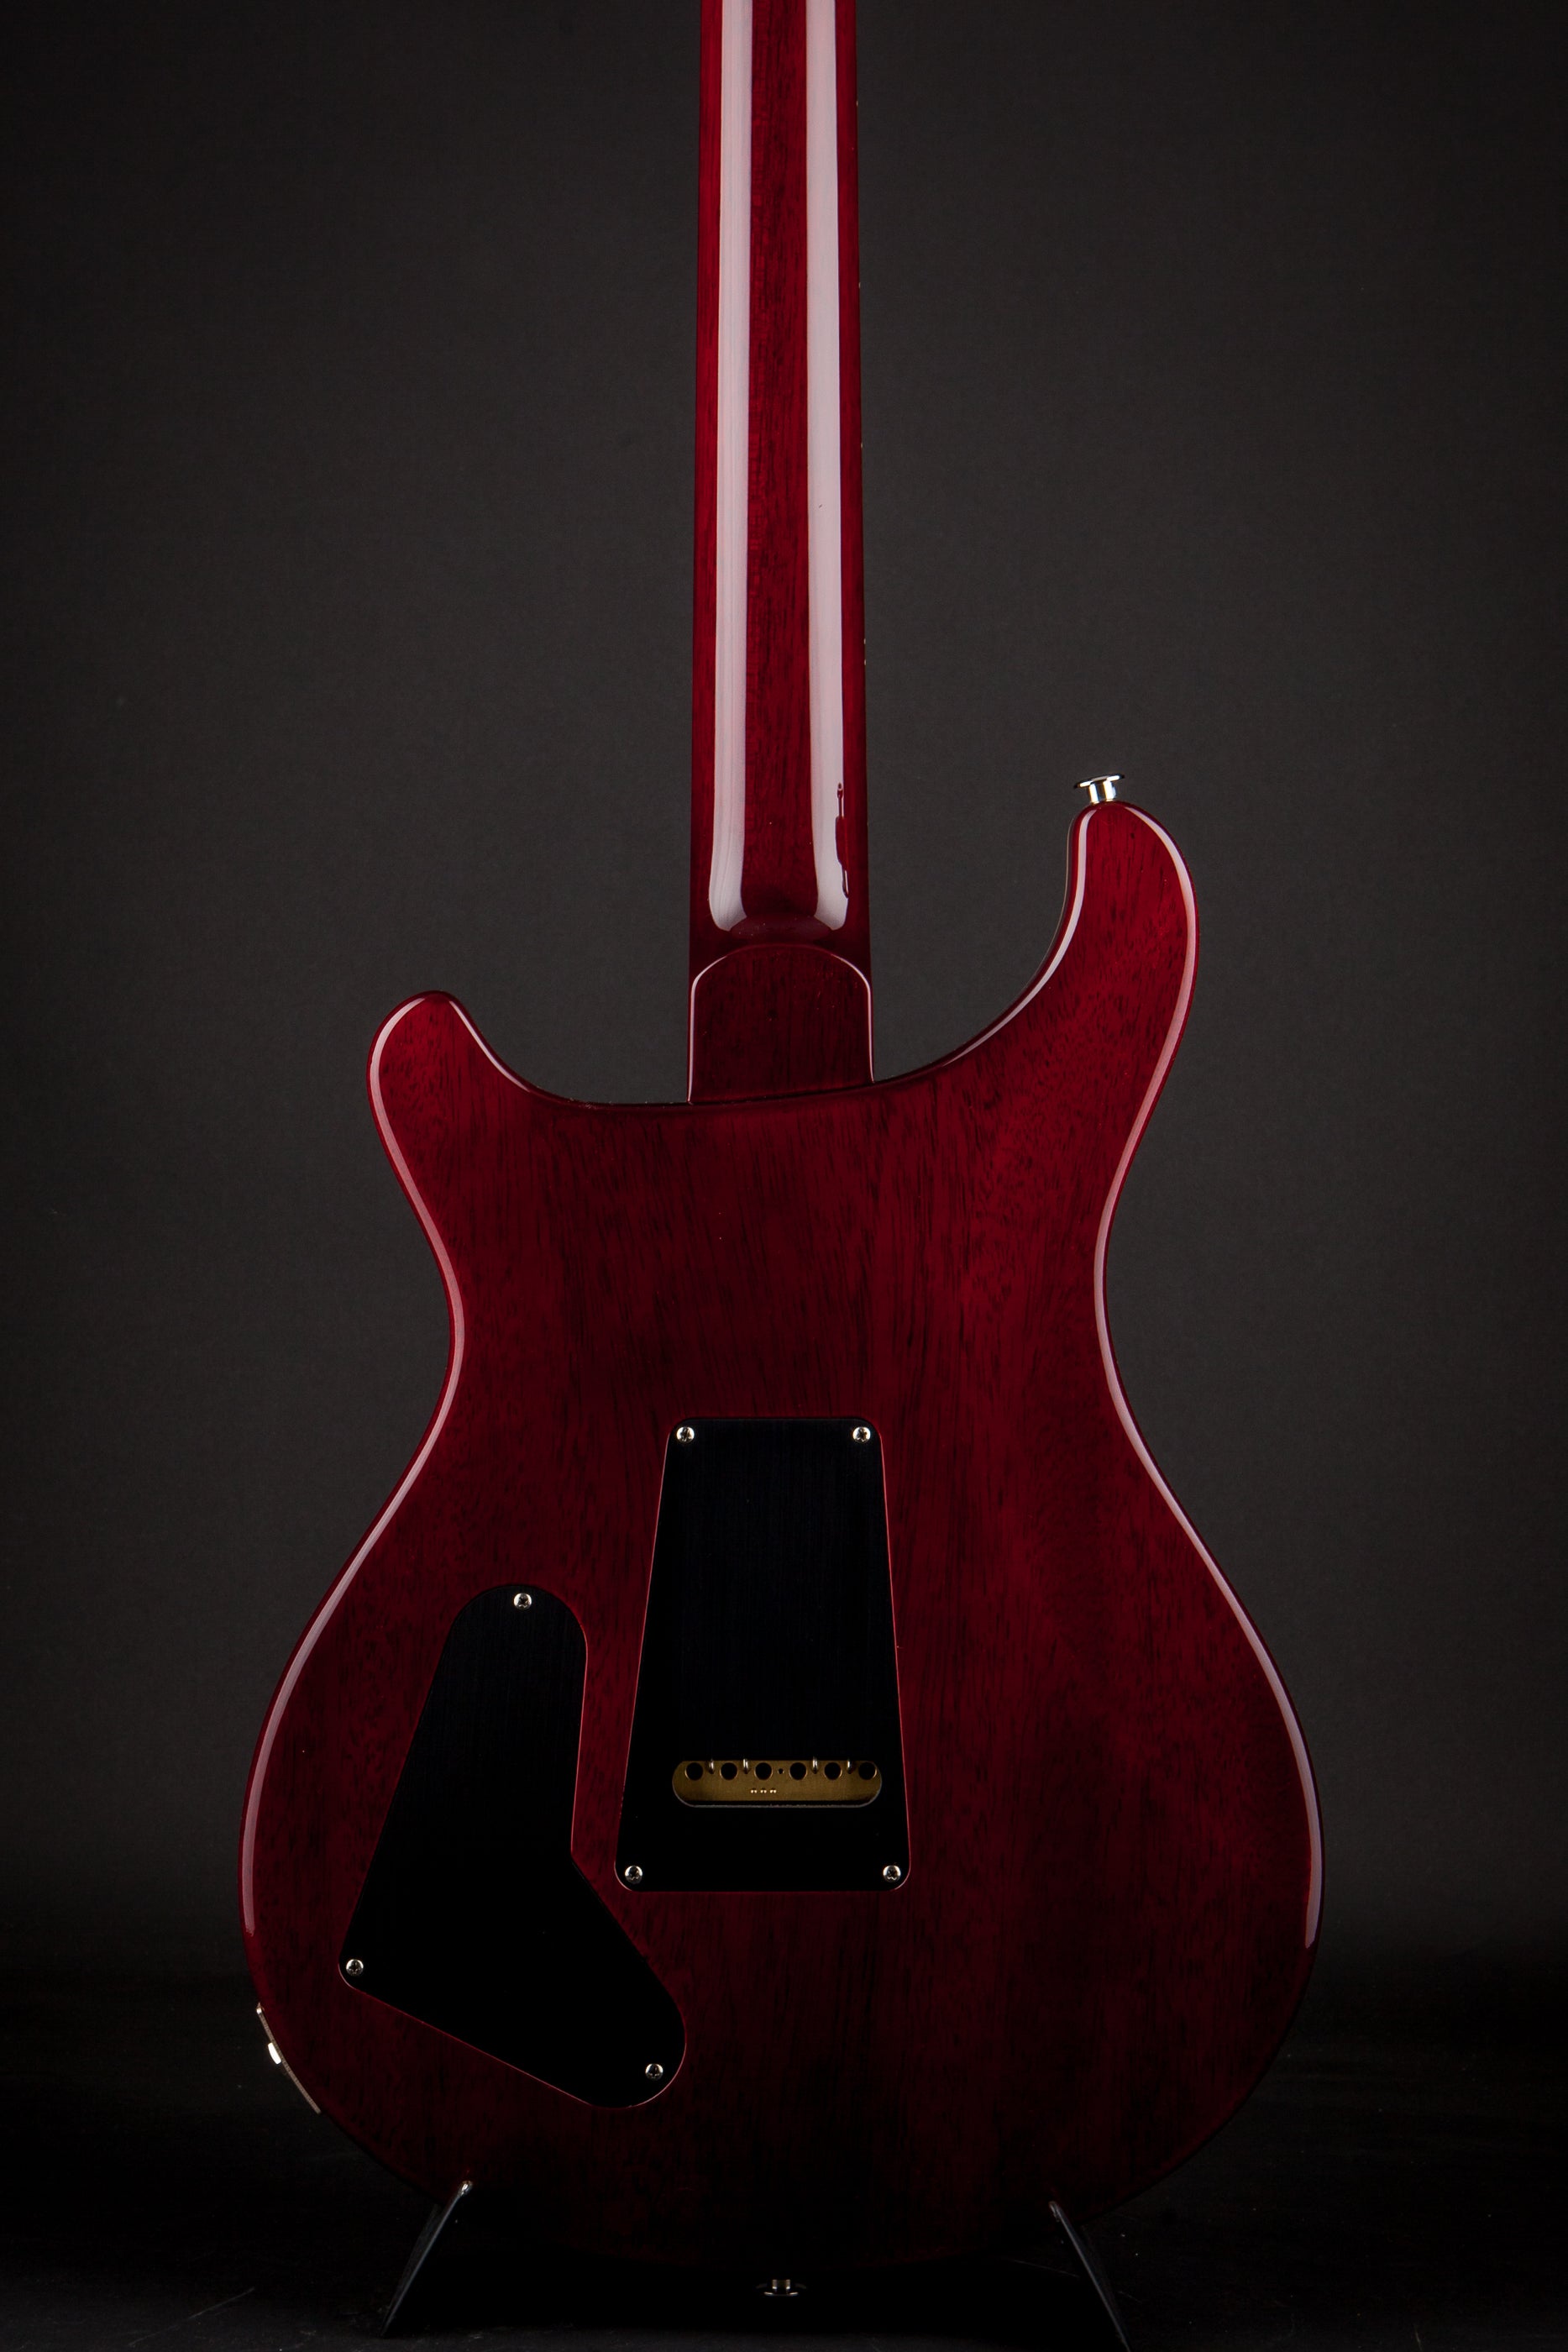 PRS Guitars: Special Semi-Hollow Fire Red #0351256